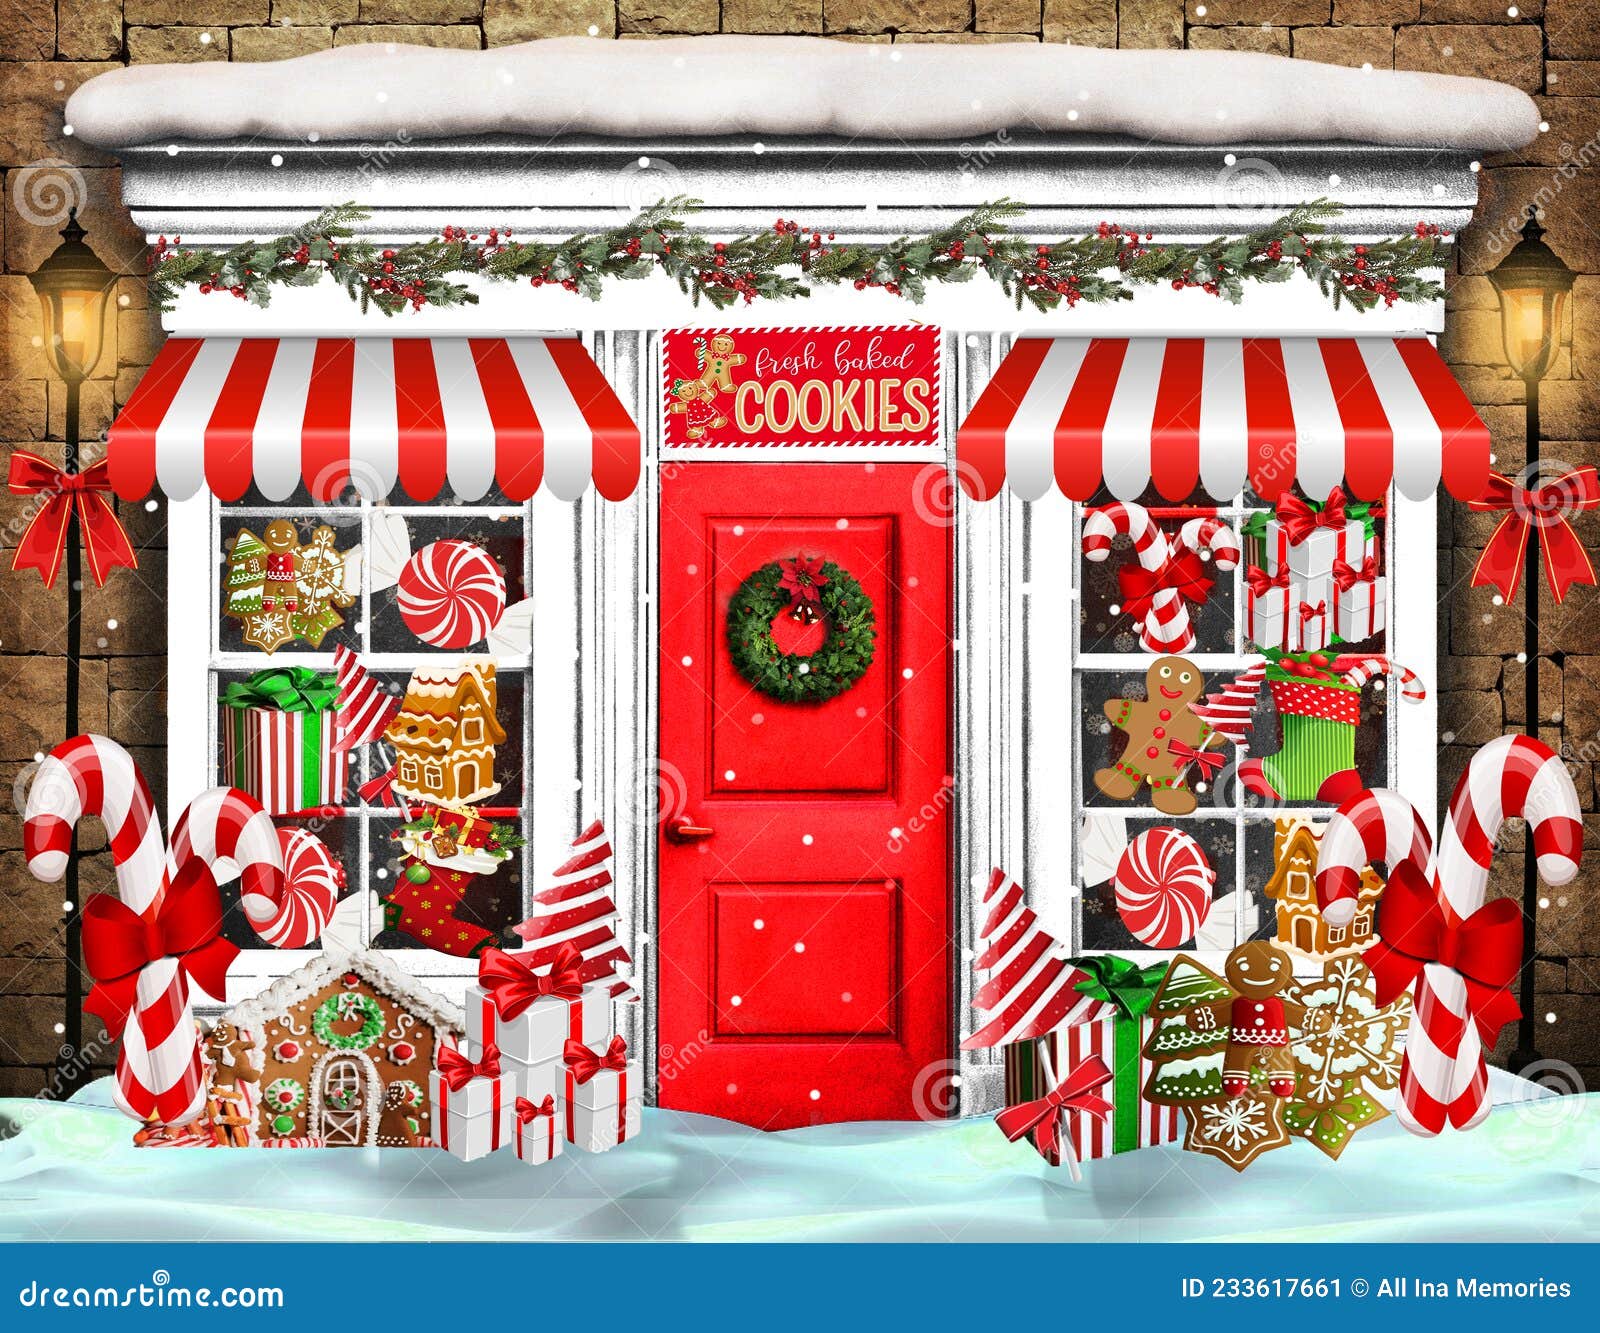 illustrated cookie store